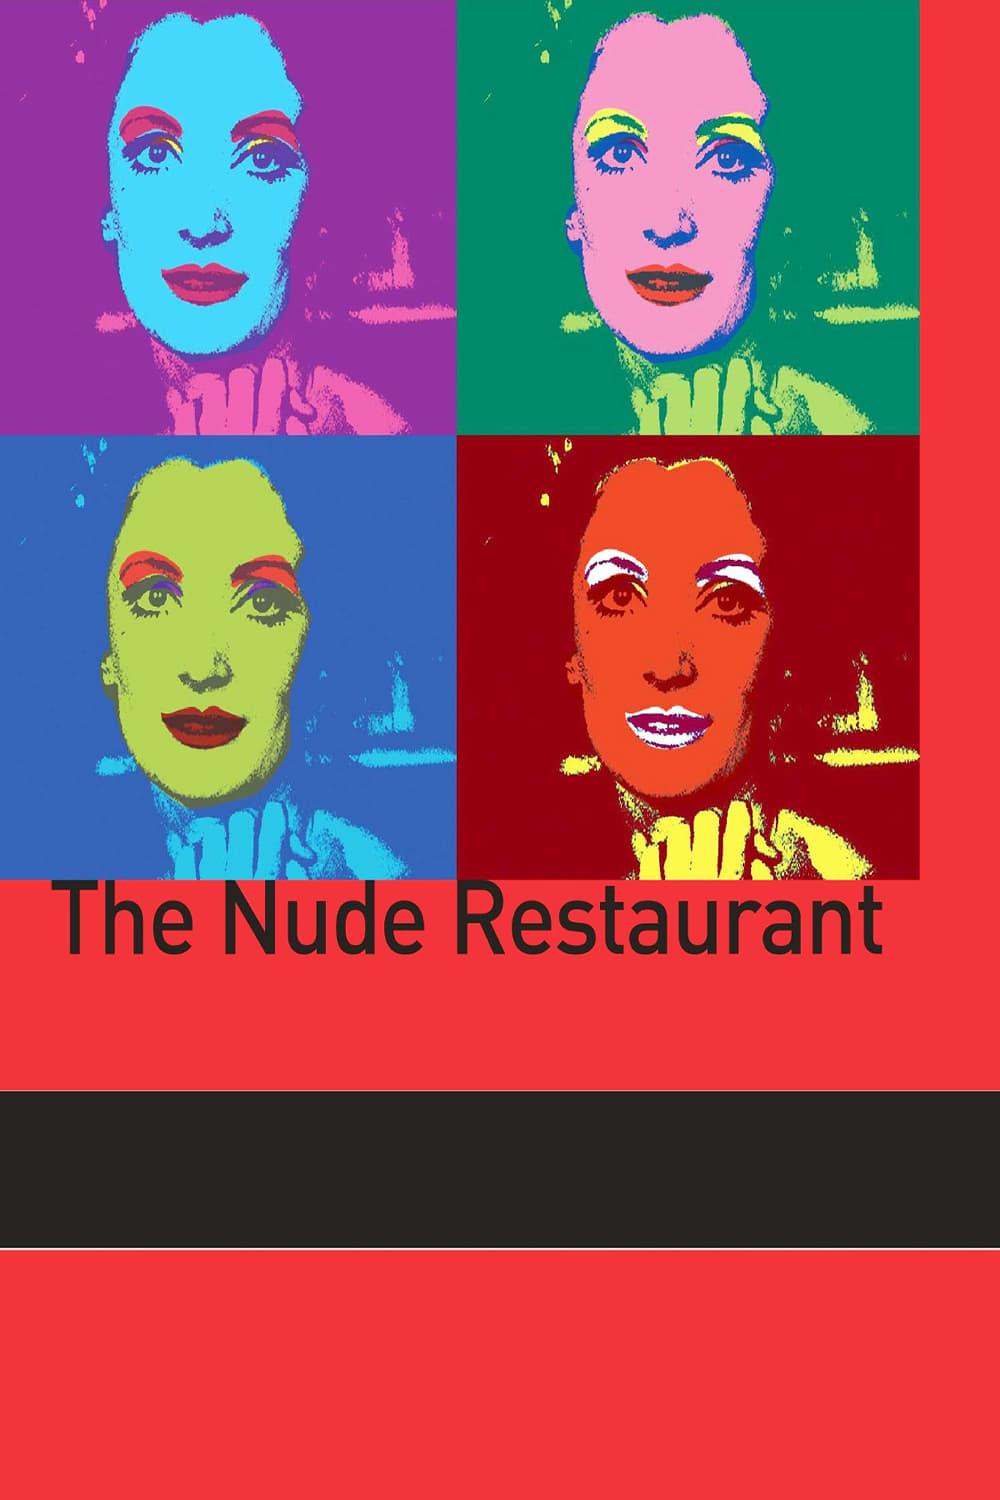 The Nude Restaurant poster